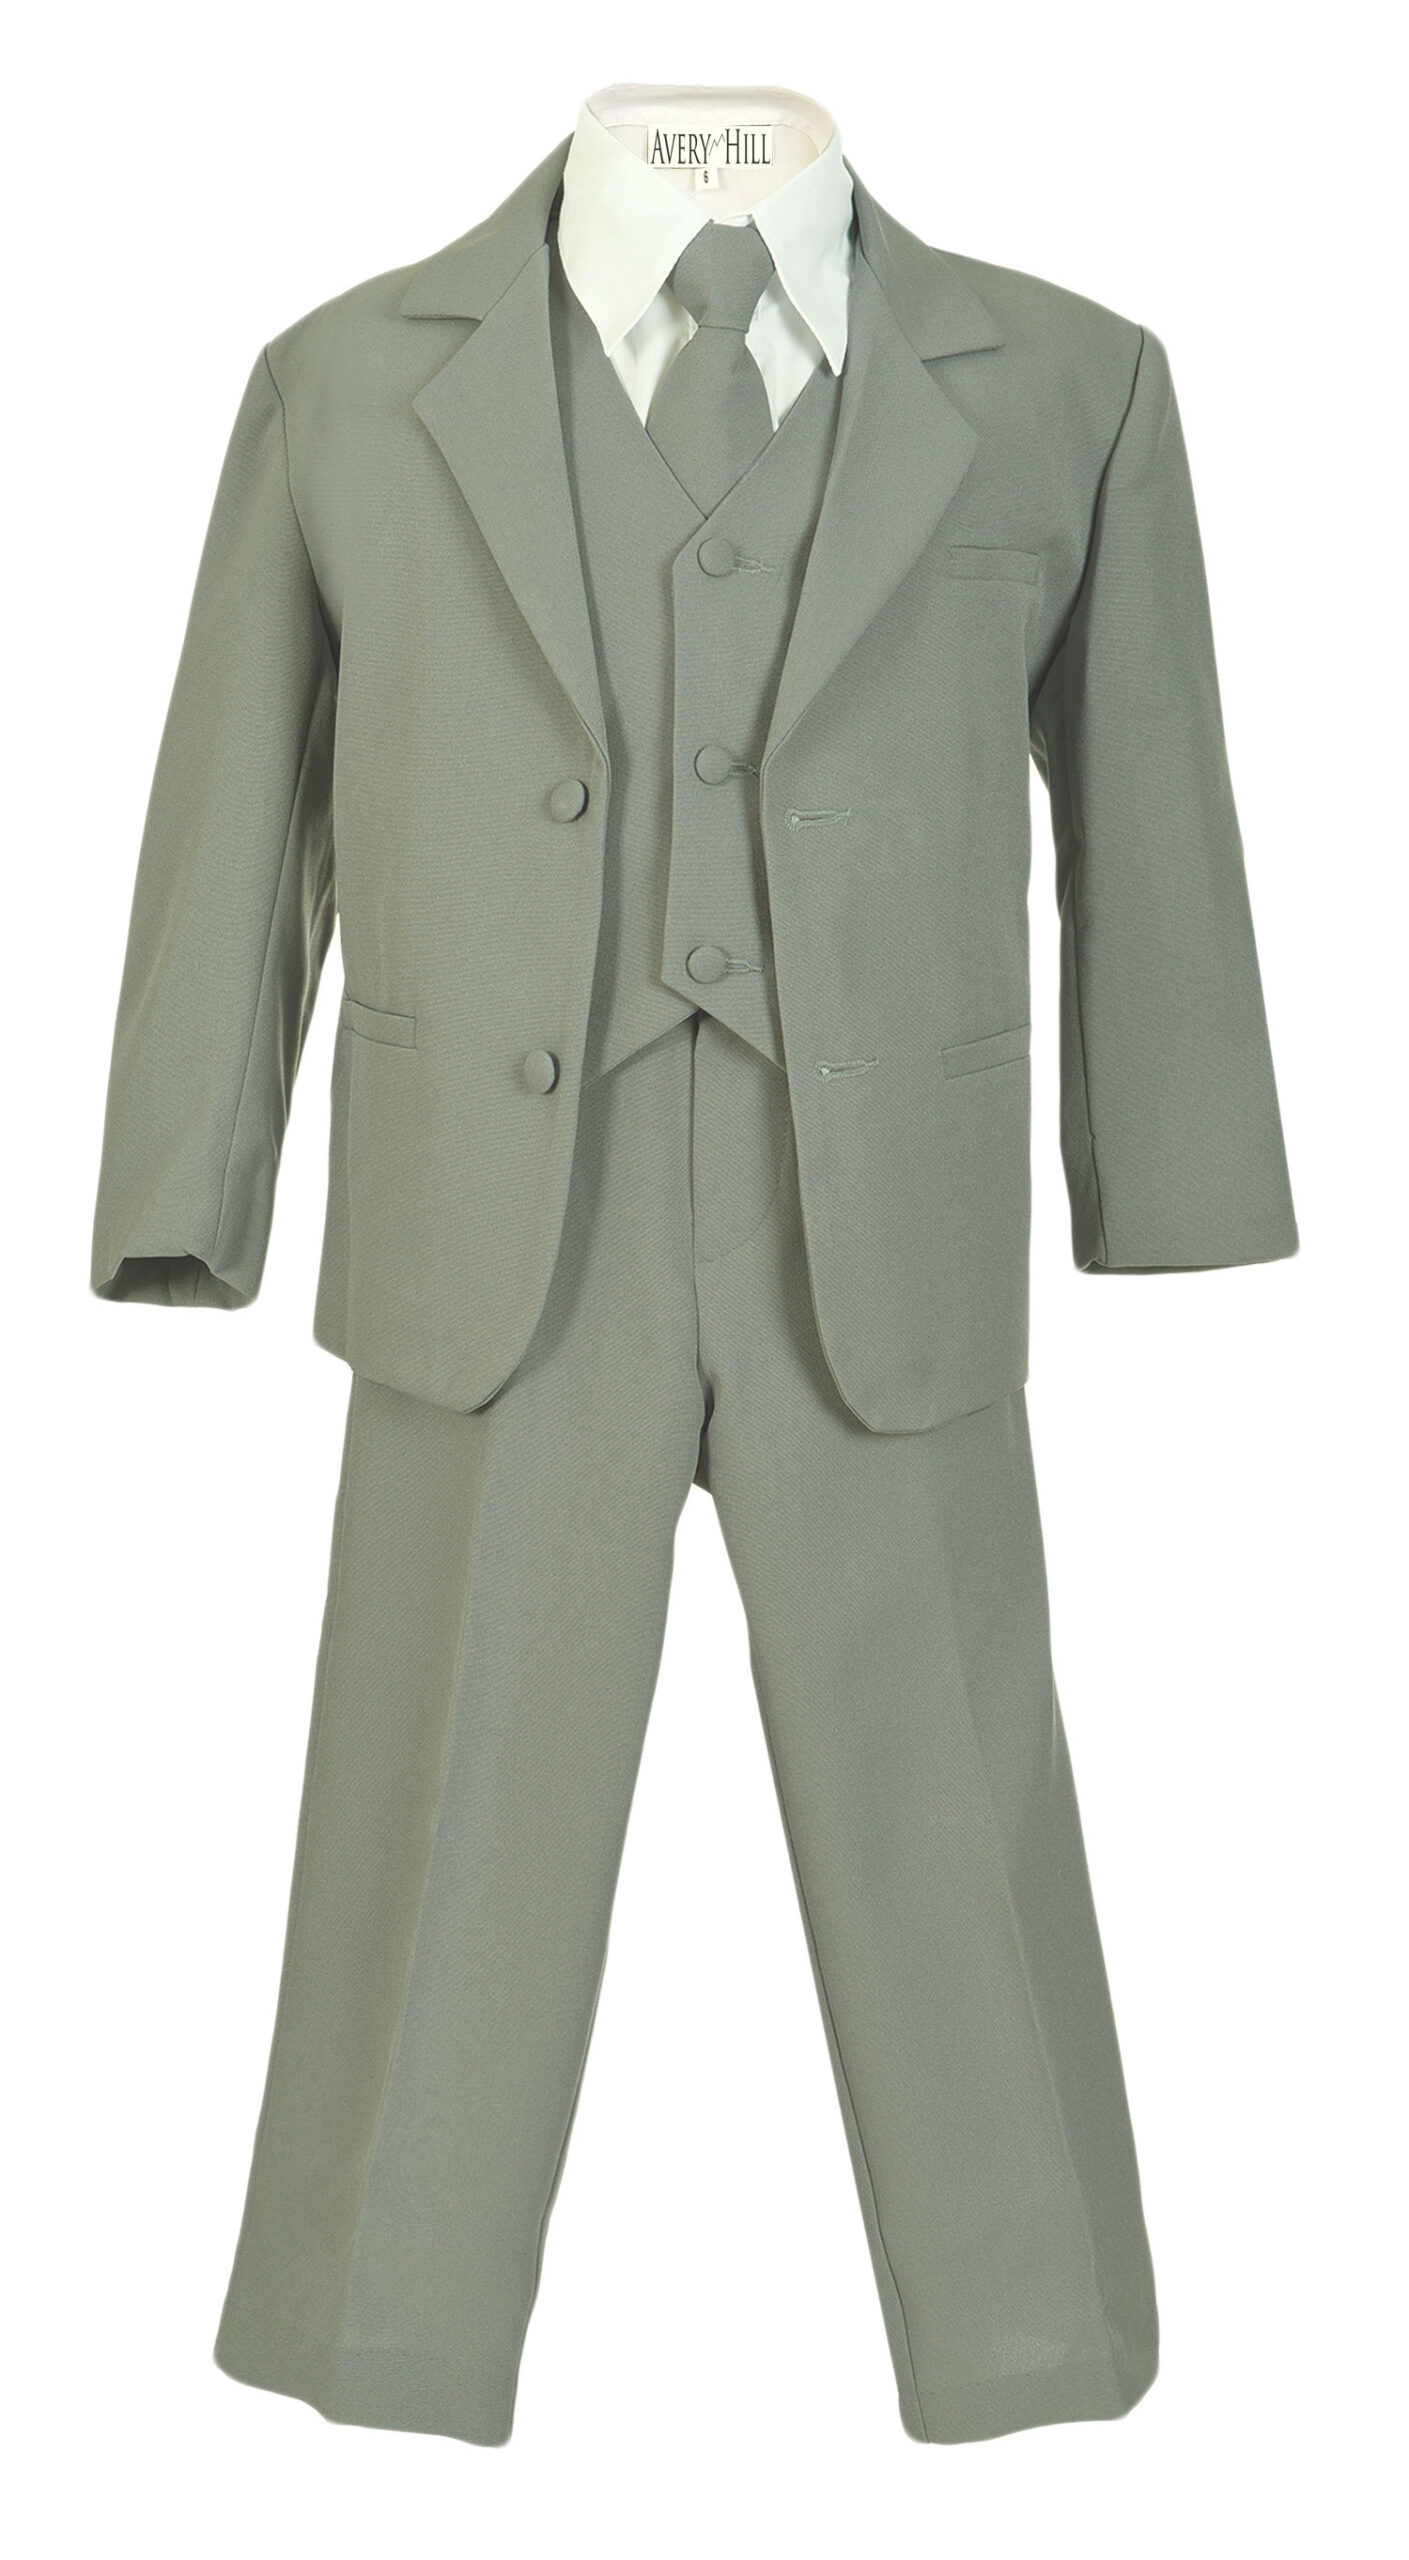 Avery Hill Boys Formal 5 Piece Suit with Shirt and Vest Silver White - 14